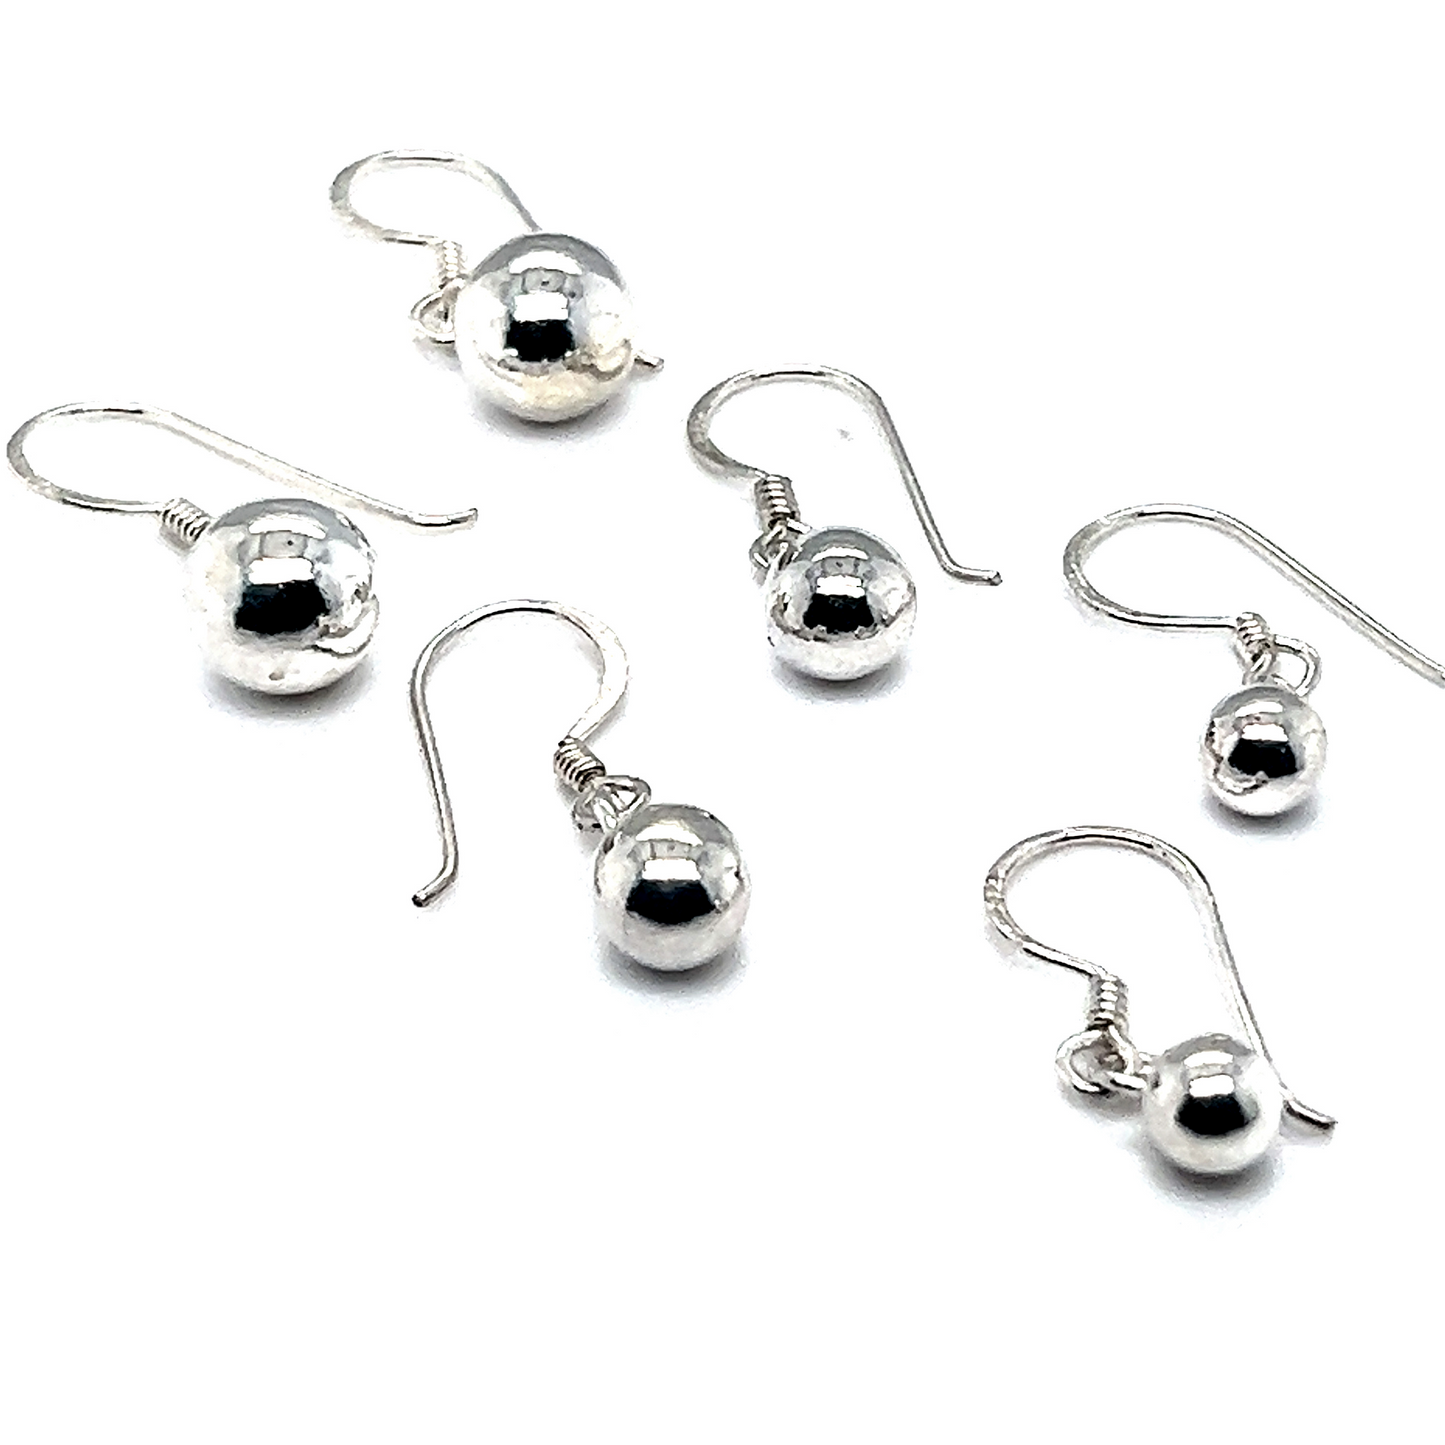 Super Silver's Simple Dangling Ball Earrings, on a white background, exuding understated glamour.